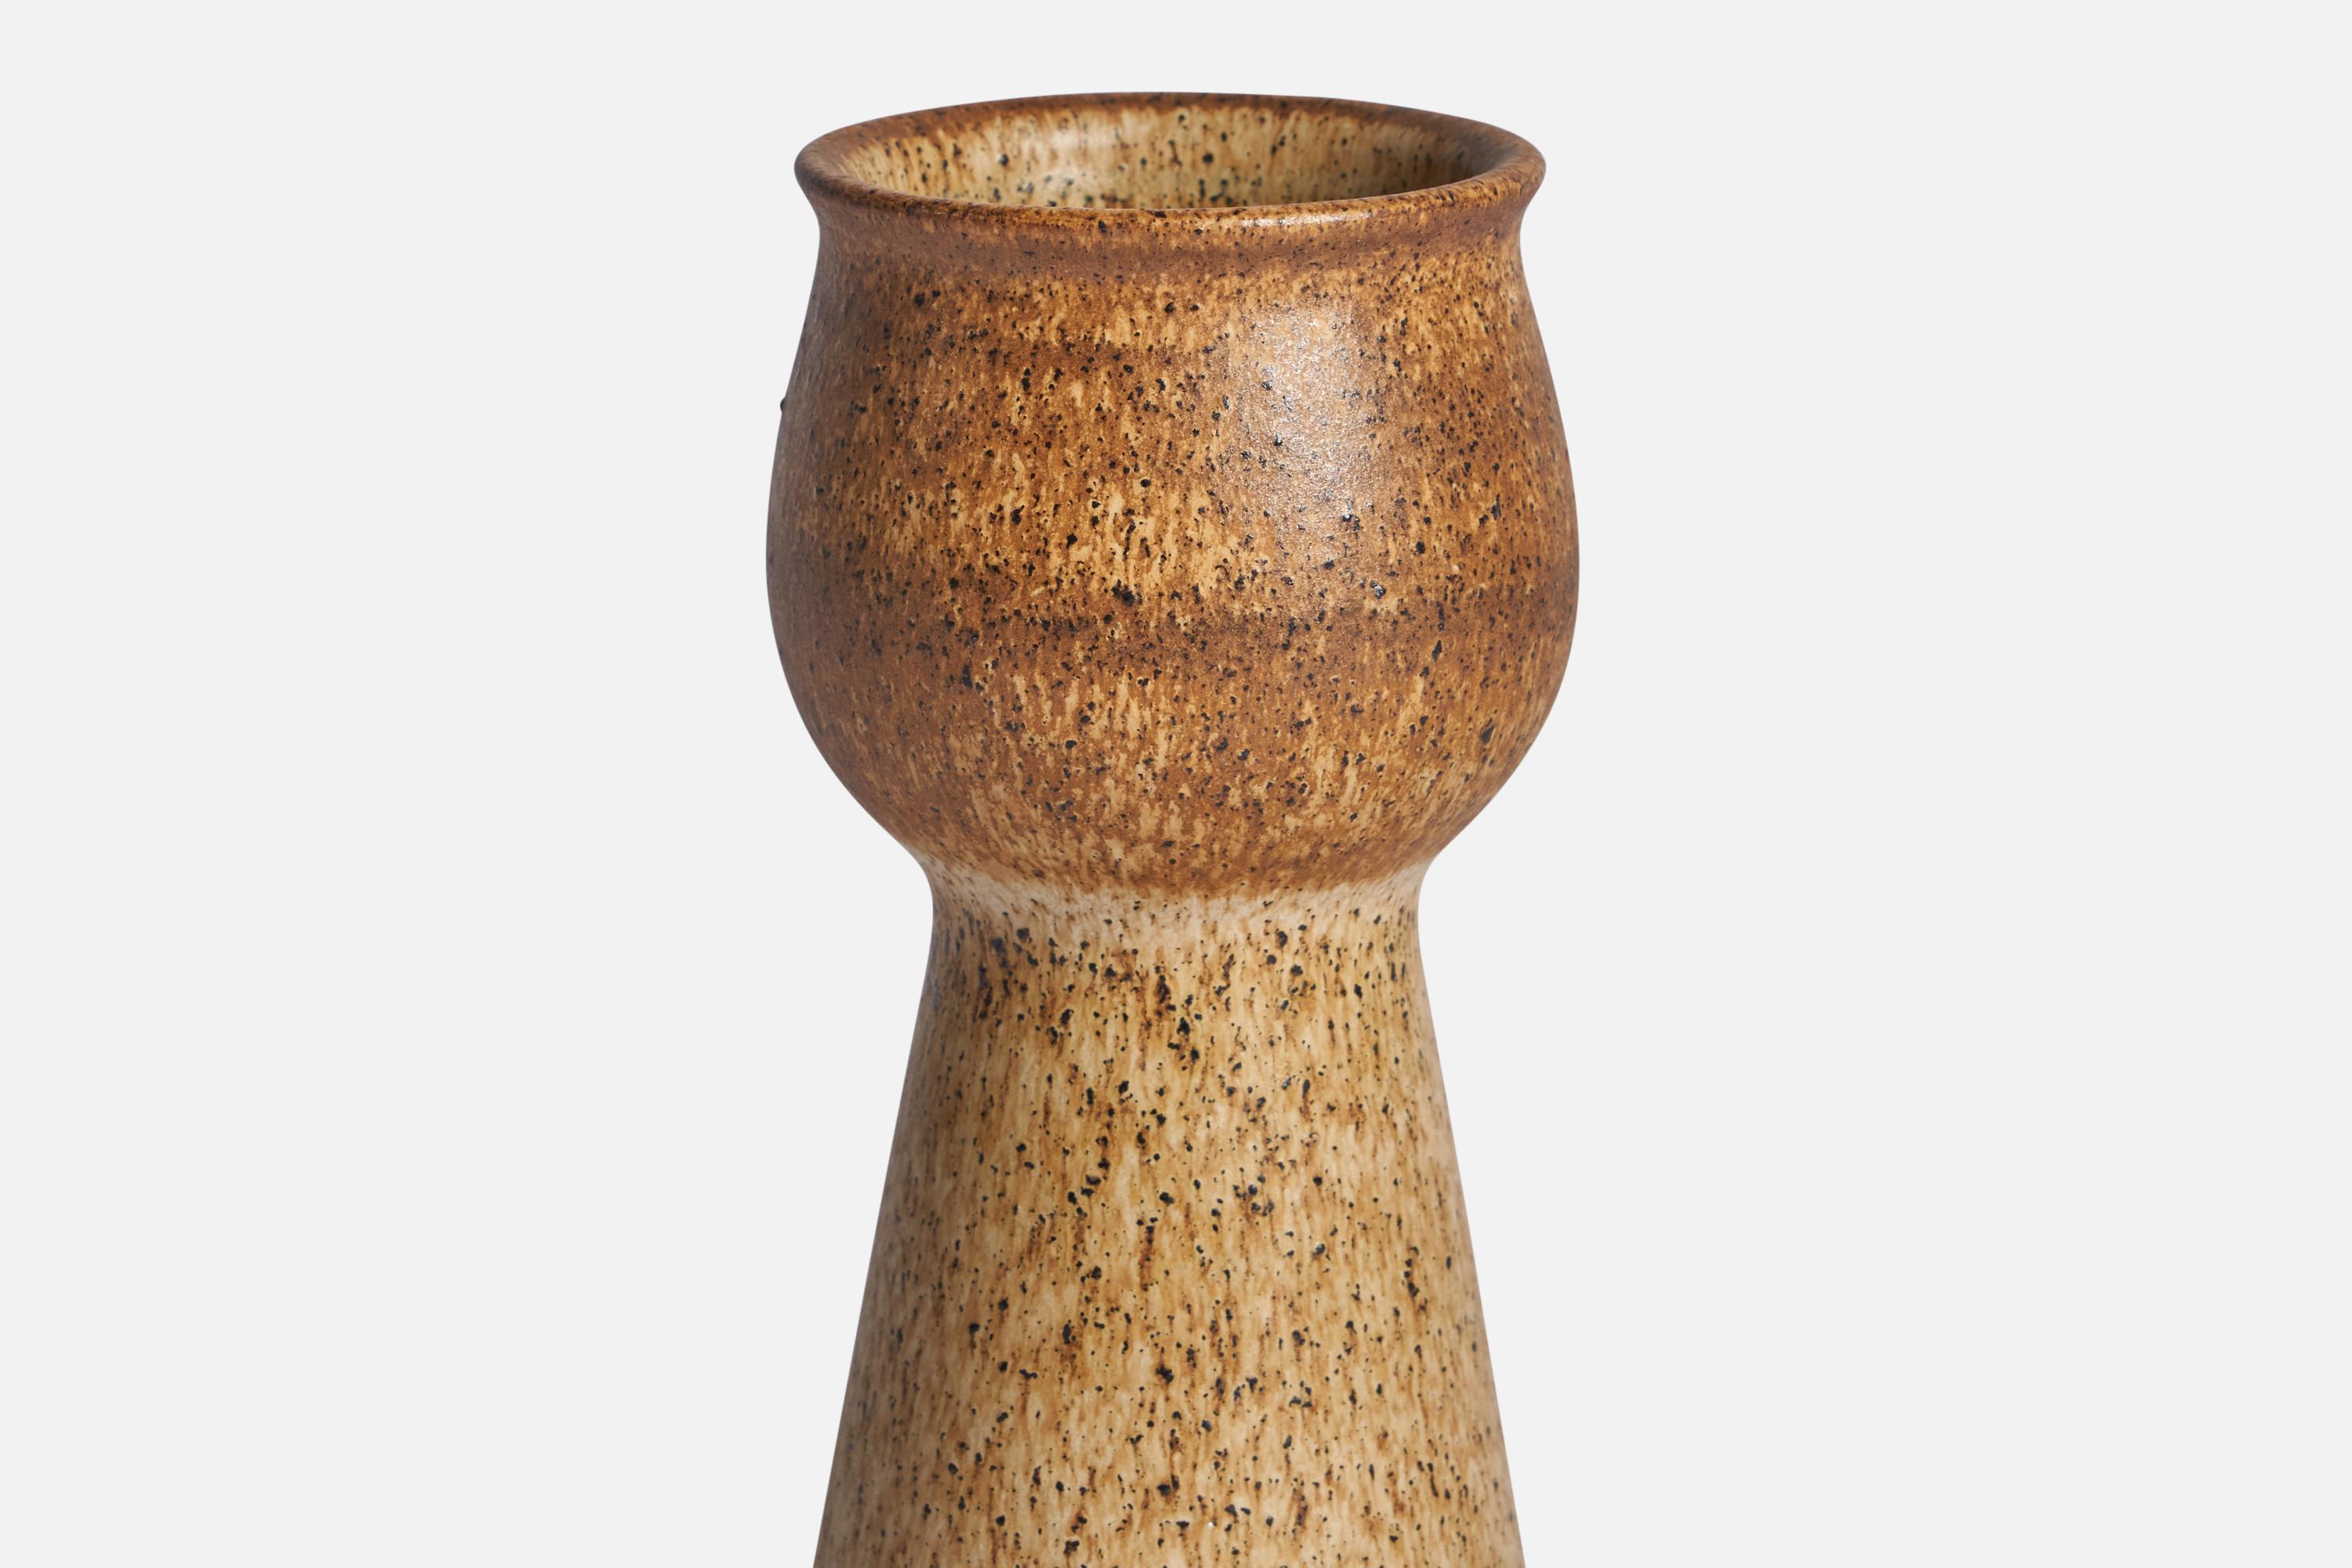 A brown and beige-glazed stoneware vase designed by Bruno Karlsson and produced by Ego Stengods, Sweden, 1960s.